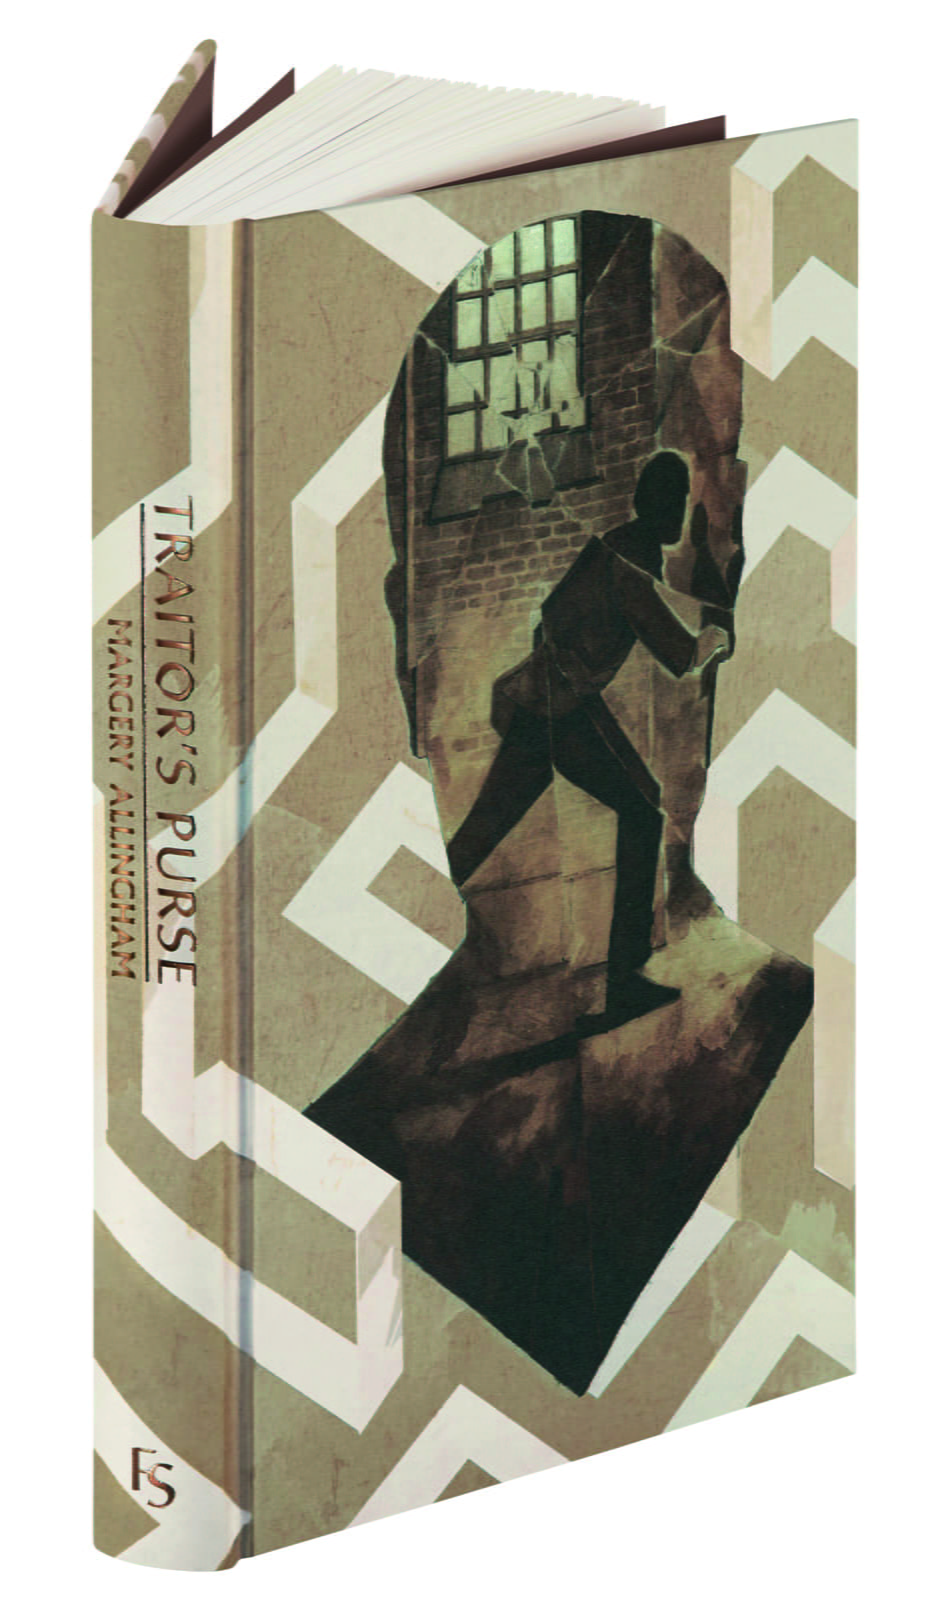 ‘The Folio Society’ Written by Margery Allingham, Illustrated by James Boswell